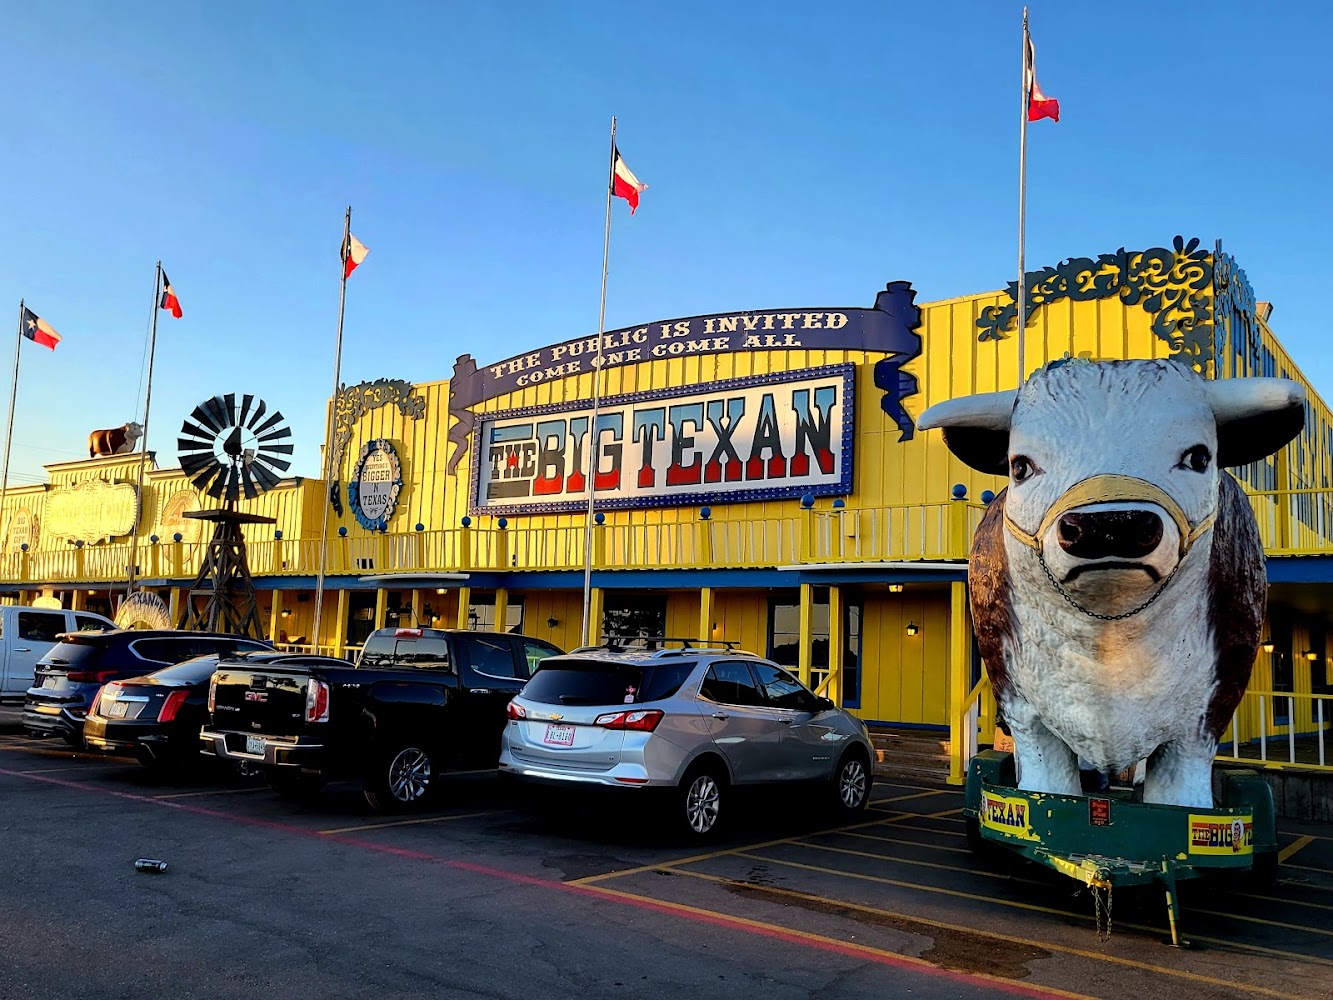 Home of the famous 72-ounce steak challenge, the Big Texan Steak Ranch is a Route 66 institution known for its hearty meals and Old West ambiance.]]>